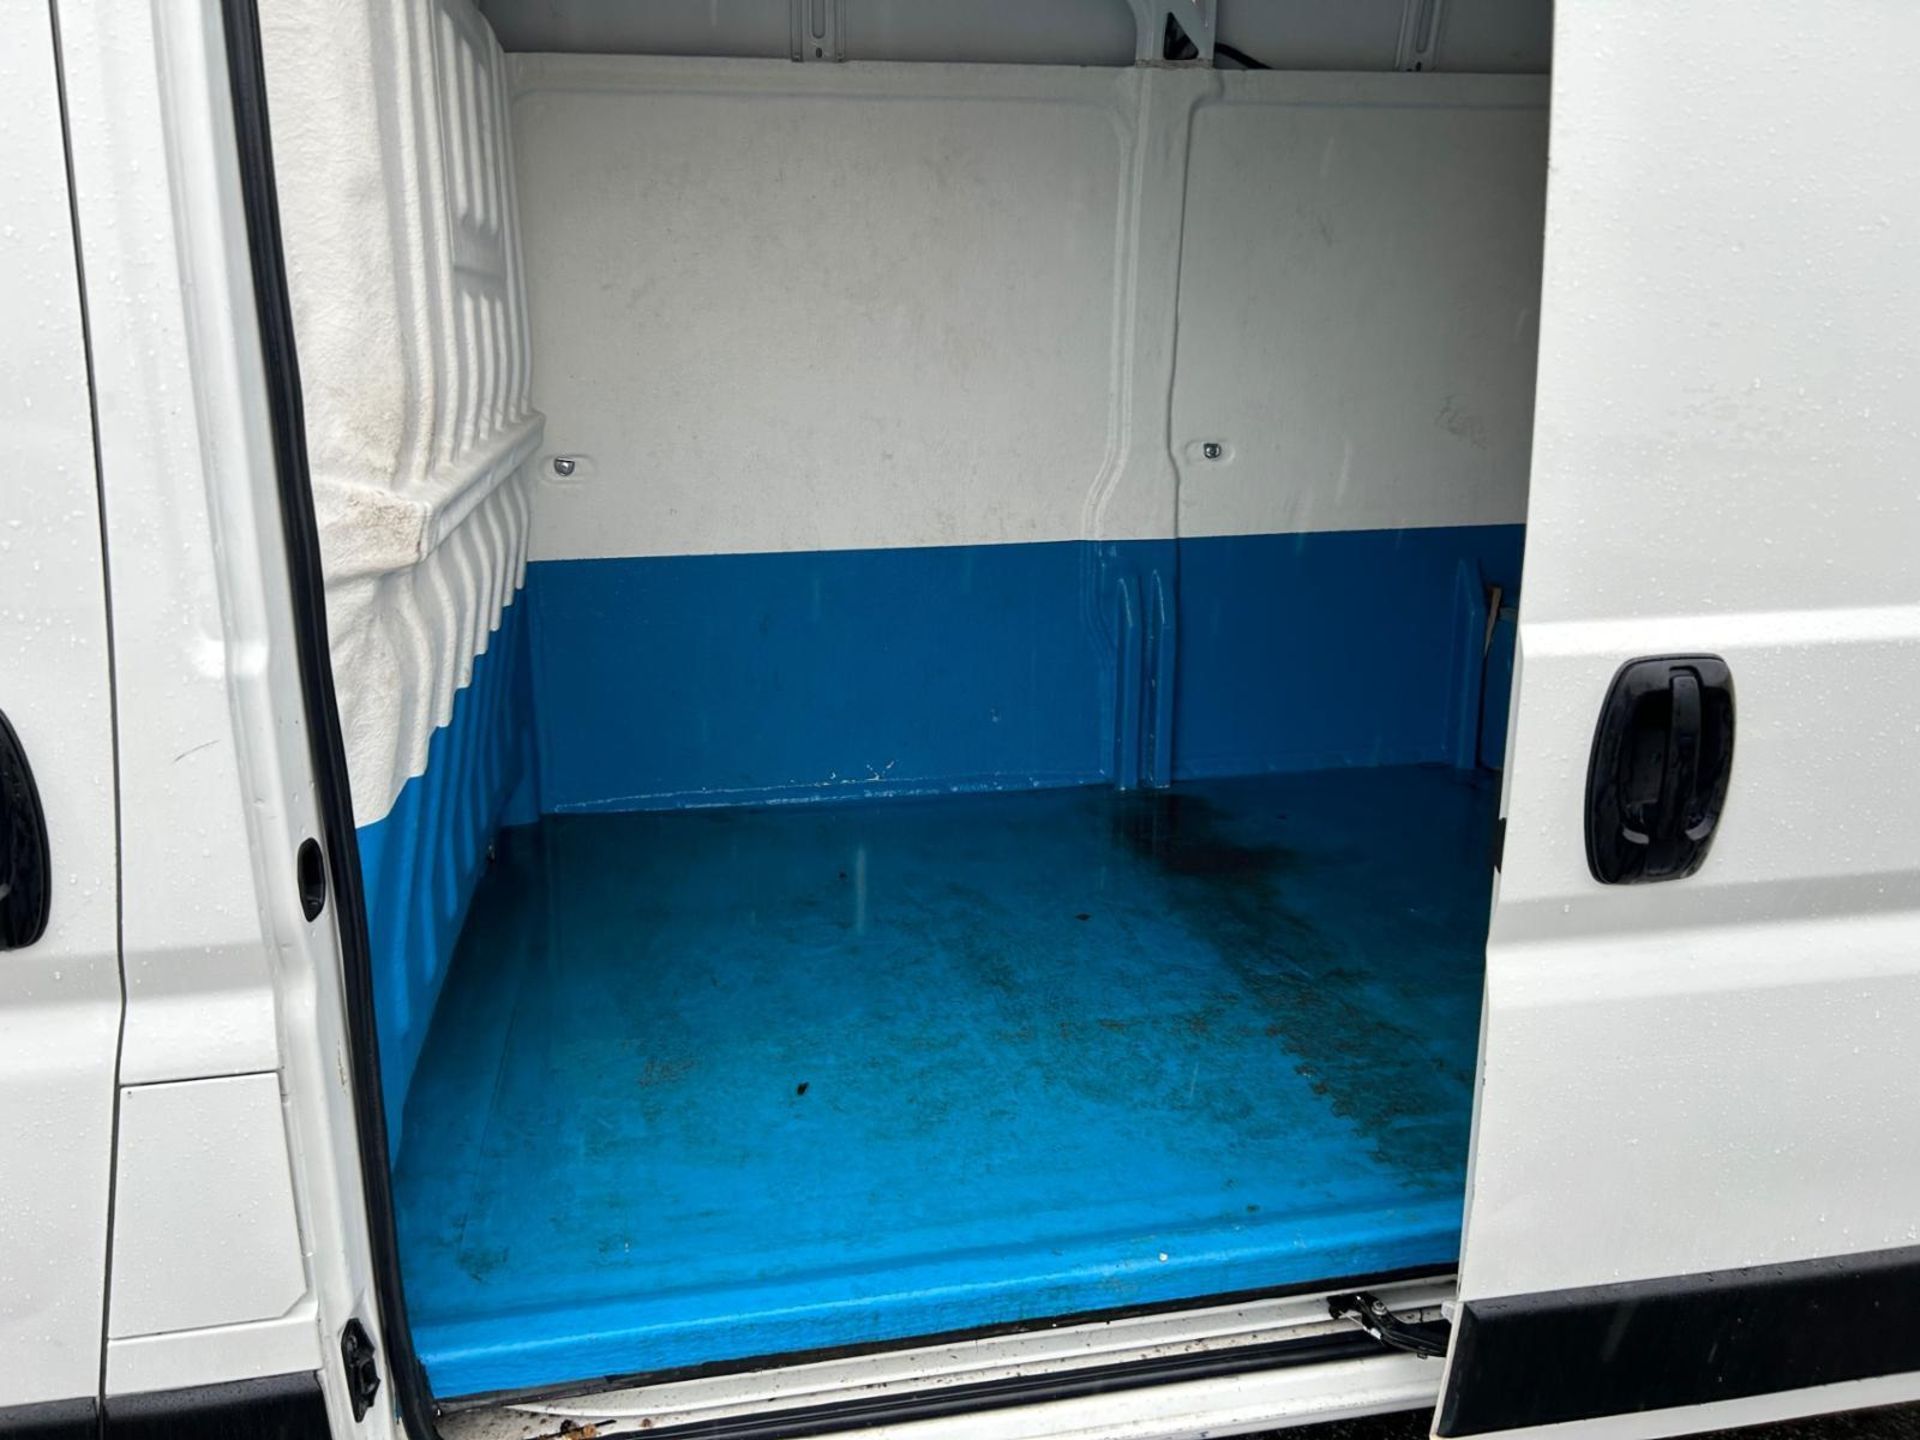 2021-21 REG CITROEN RELAY 35 L3H2 BHDI -HPI CLEAR - READY FOR WORK! - Image 8 of 13